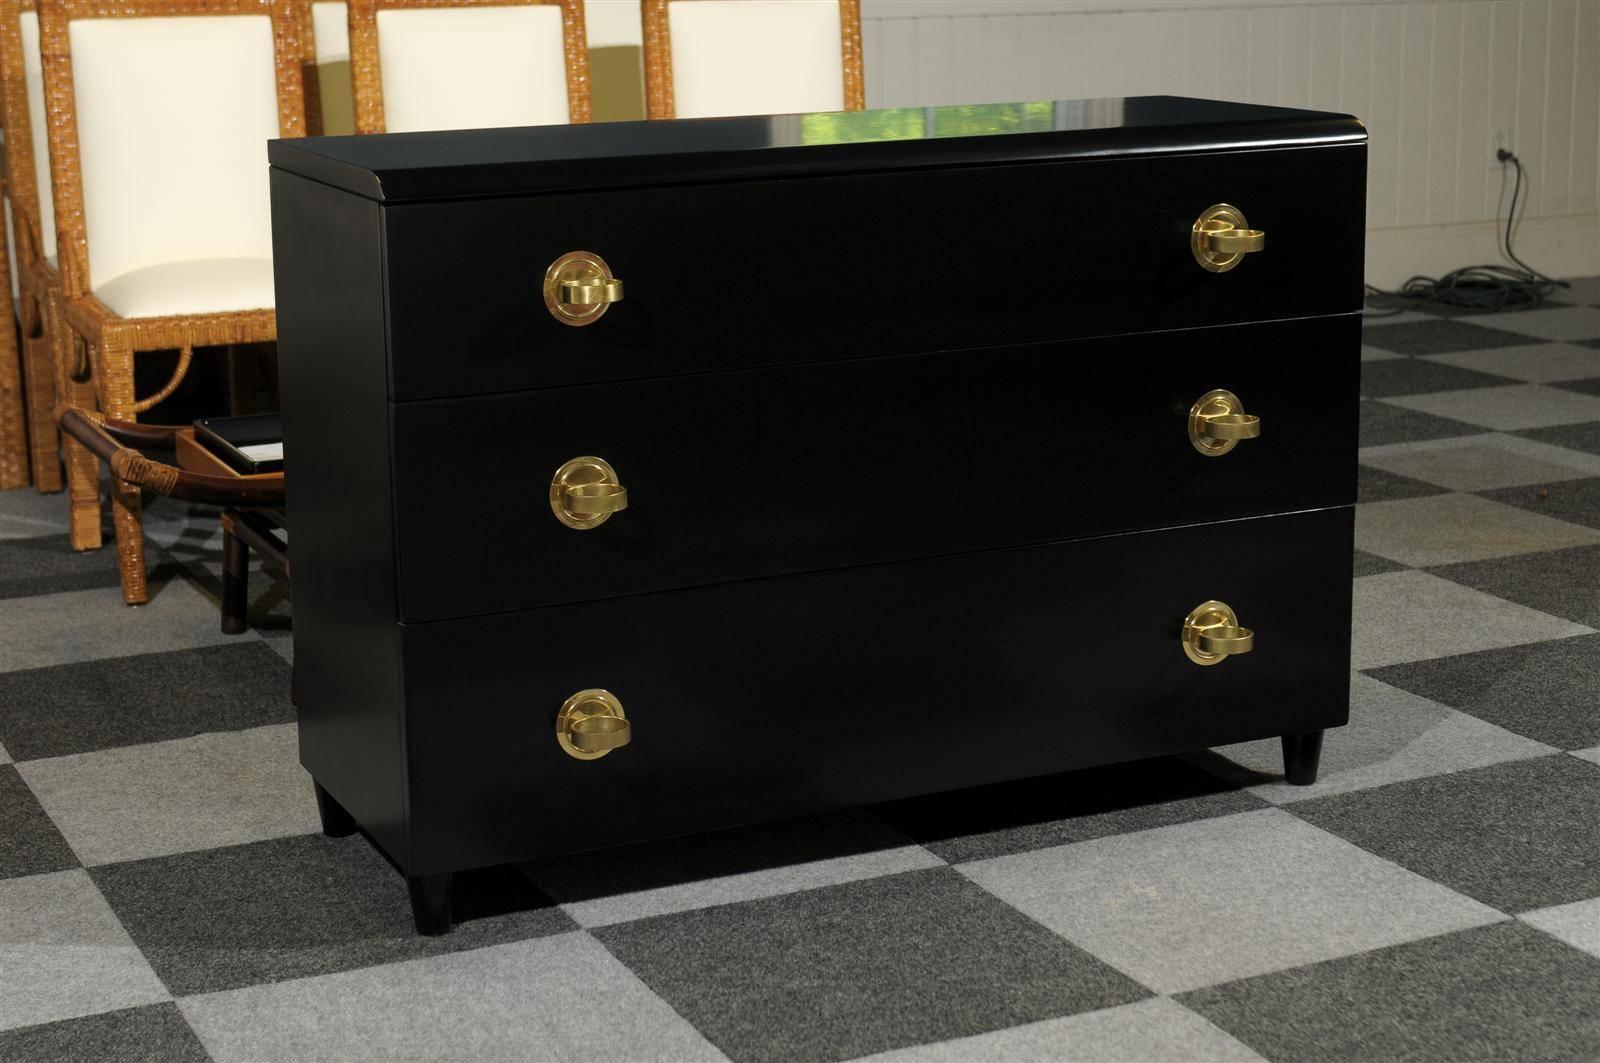 An absolutely stunning modern three-drawer commode by John Stuart, circa 1940. Clean, elegant mahogany case design with a striking bullnose detail along the front of the top. Chunky solid brass hardware accent the drawers. An exceptionally made